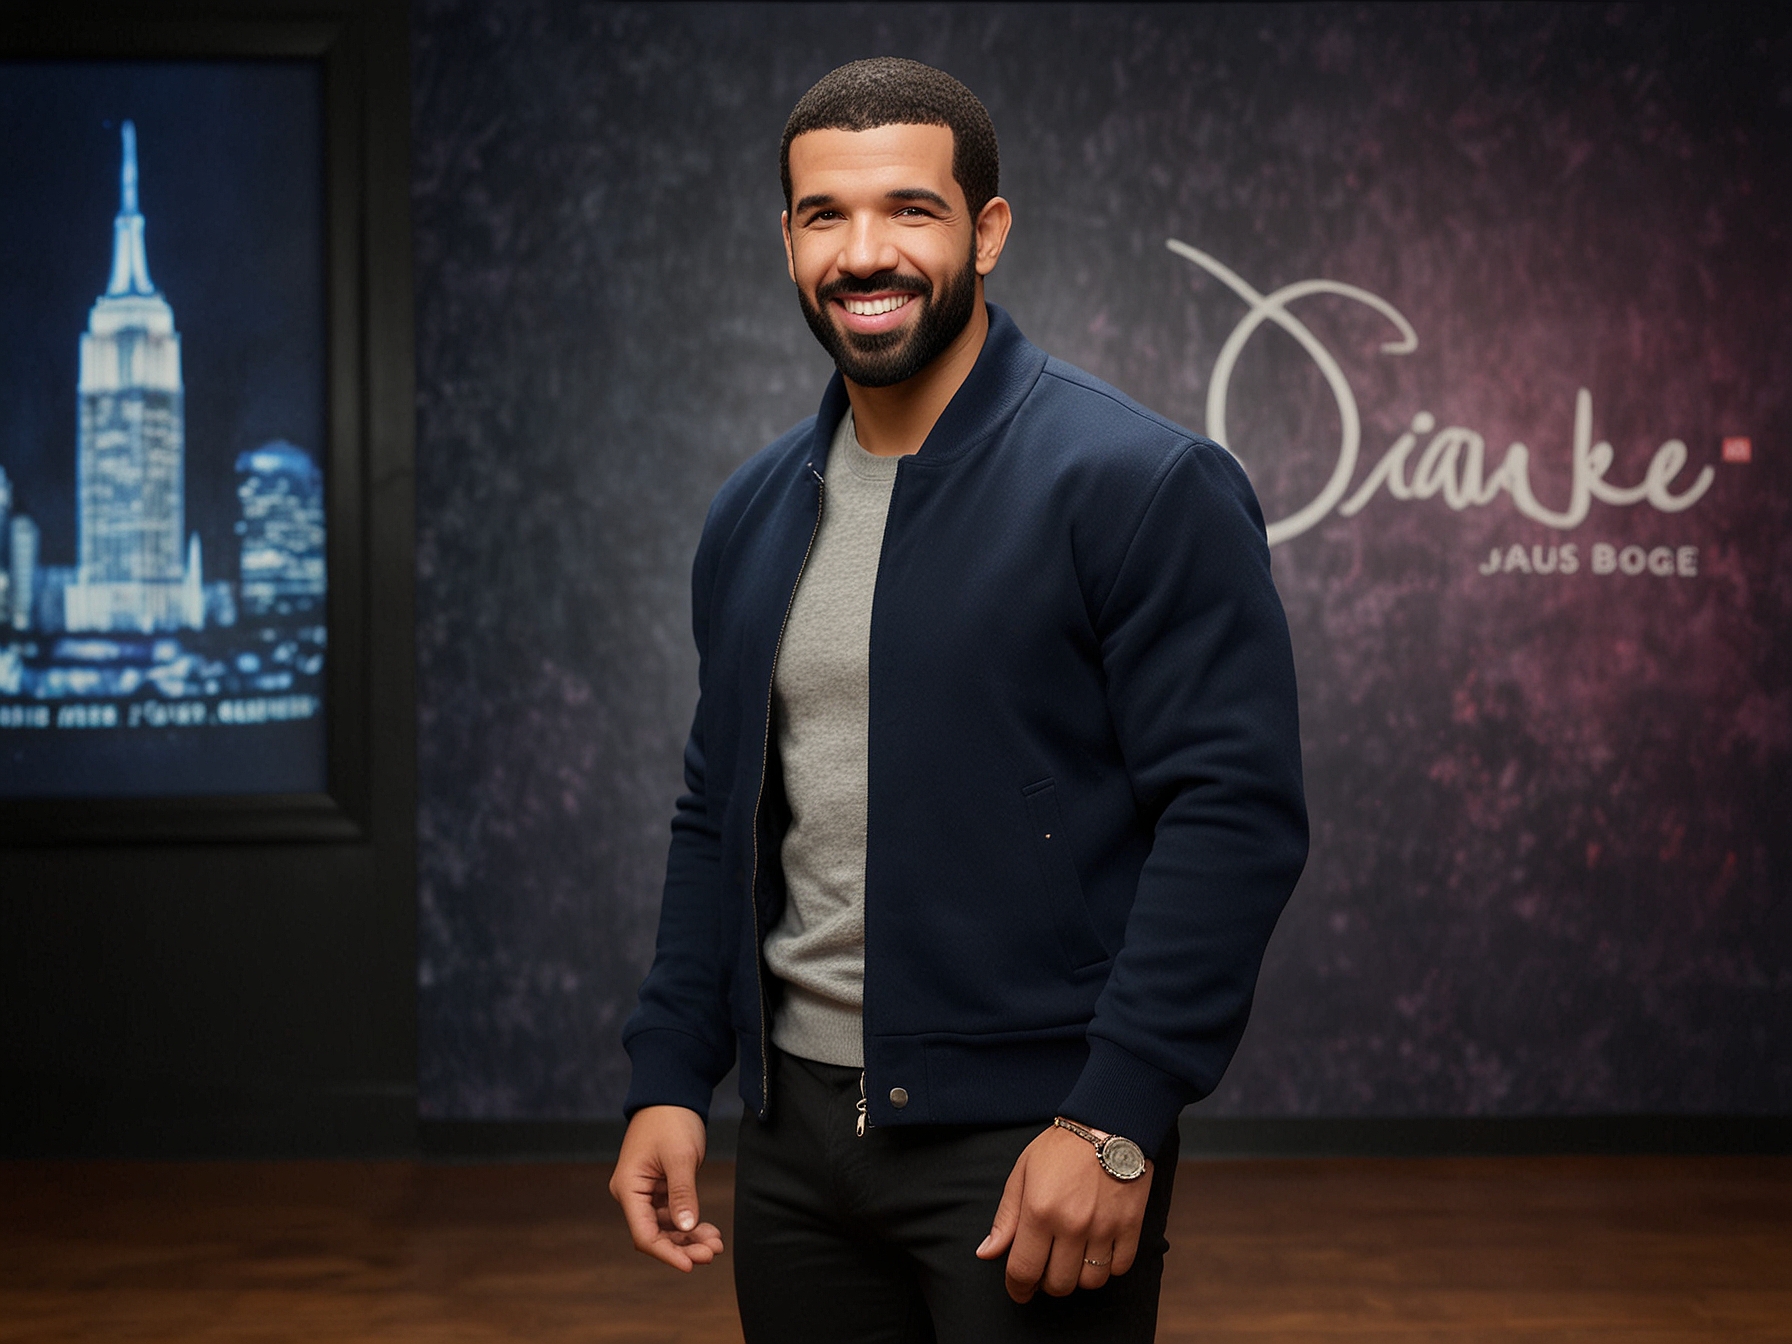 The newly unveiled Drake wax figure at Madame Tussauds New York, capturing his iconic pose and signature look. Fans eagerly pose for selfies and share their excitement online.